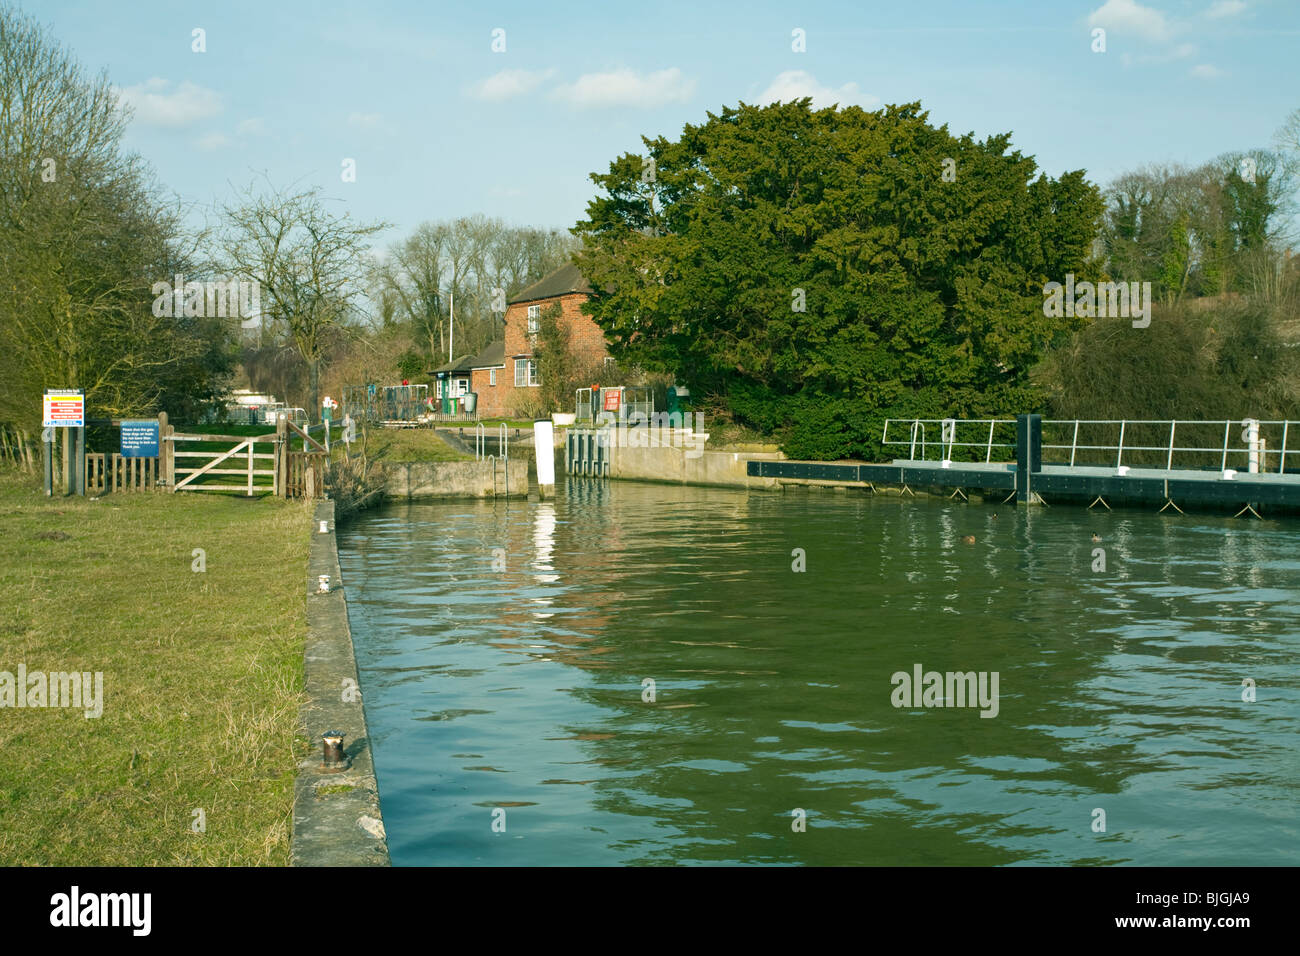 Cleeve Lock on the River Thames near Goring, Oxfordshire, Uk Stock Photo